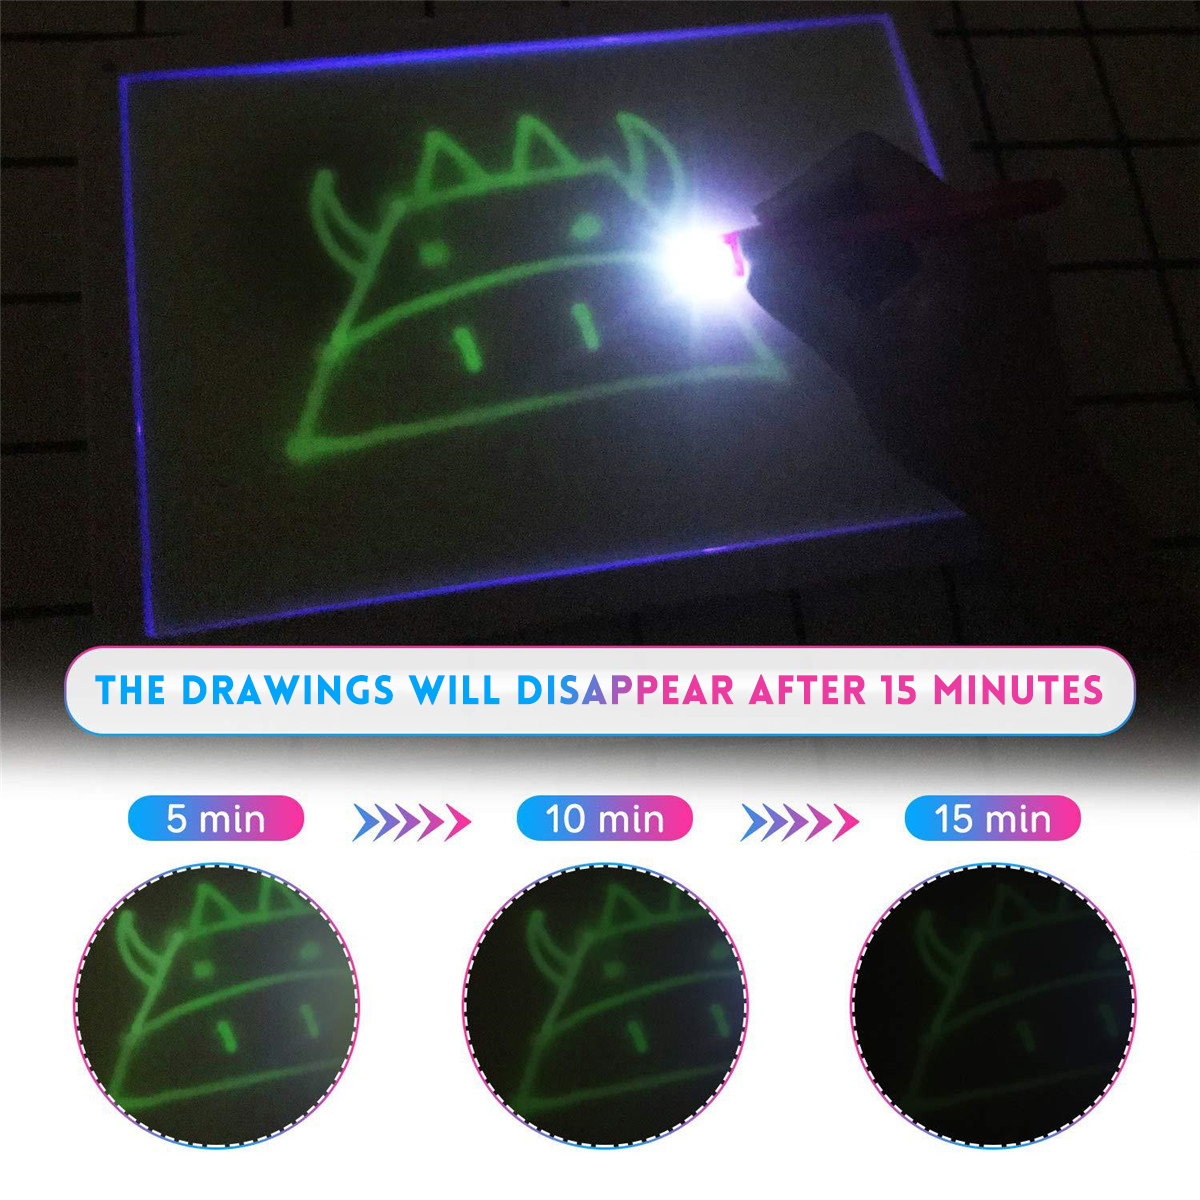  A3 A4 A5 Size 3D Children's Fluorescent Drawing Board Toy Draw with Light Fun for Kids Family